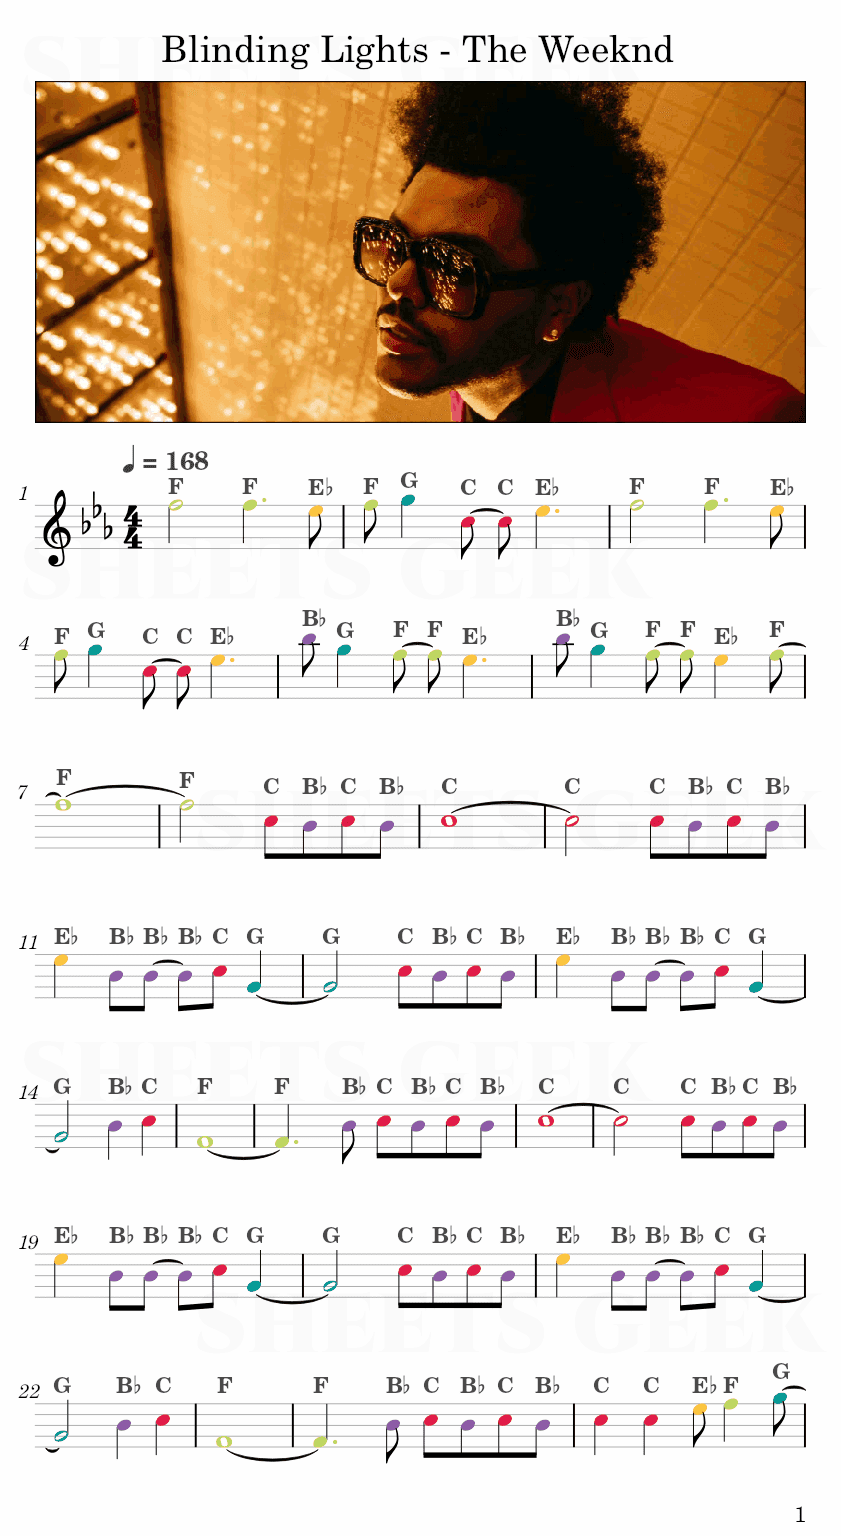 Blinding Lights - The Weeknd Easy Sheet Music Free for piano, keyboard, flute, violin, sax, cello page 1